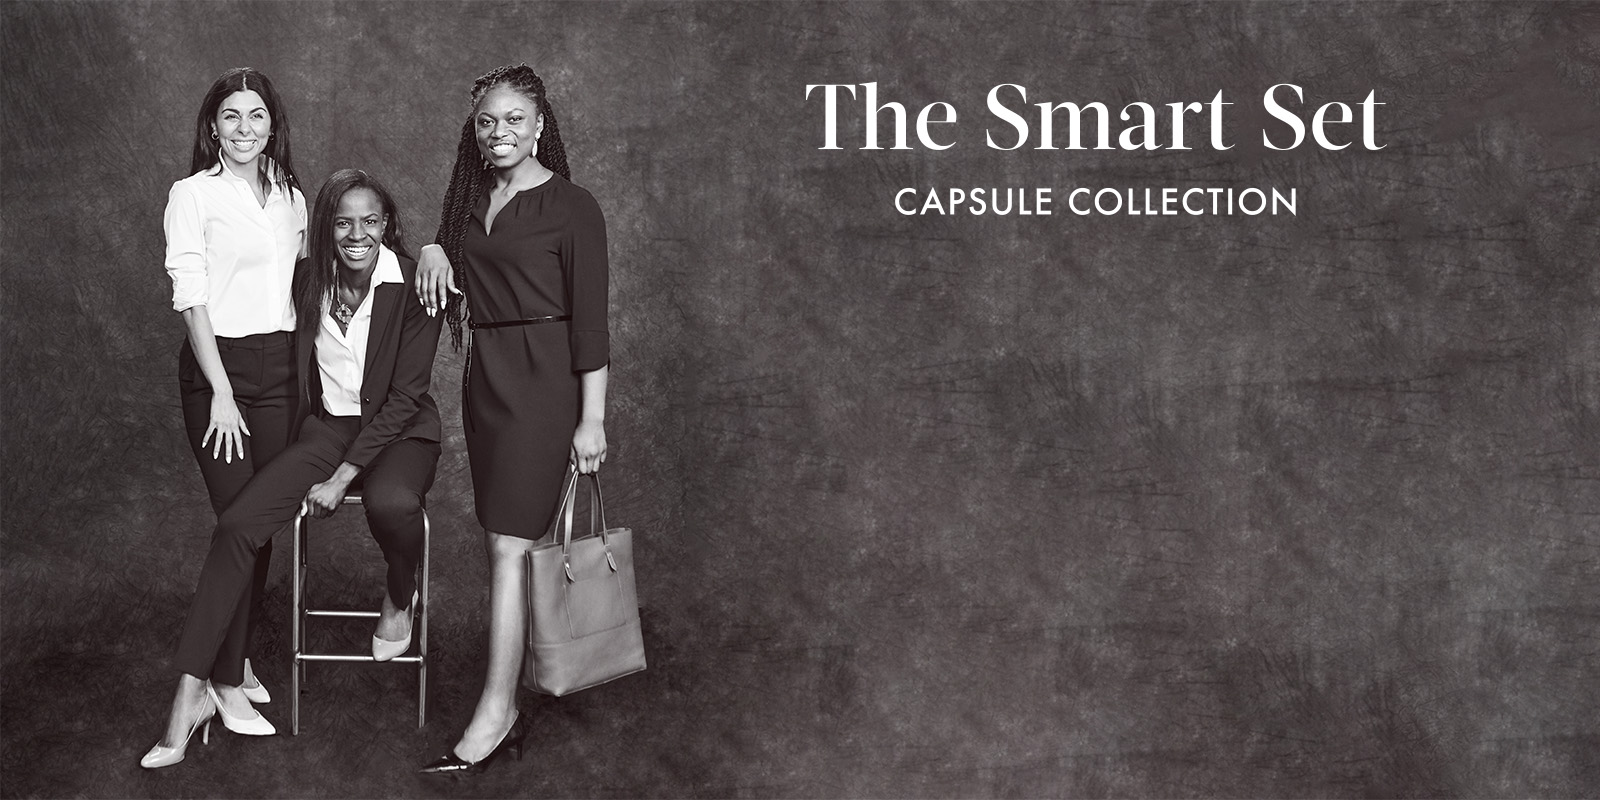 HRH The Duchess of Sussex and Smart Works launch the Smart Set Capsule Collection image